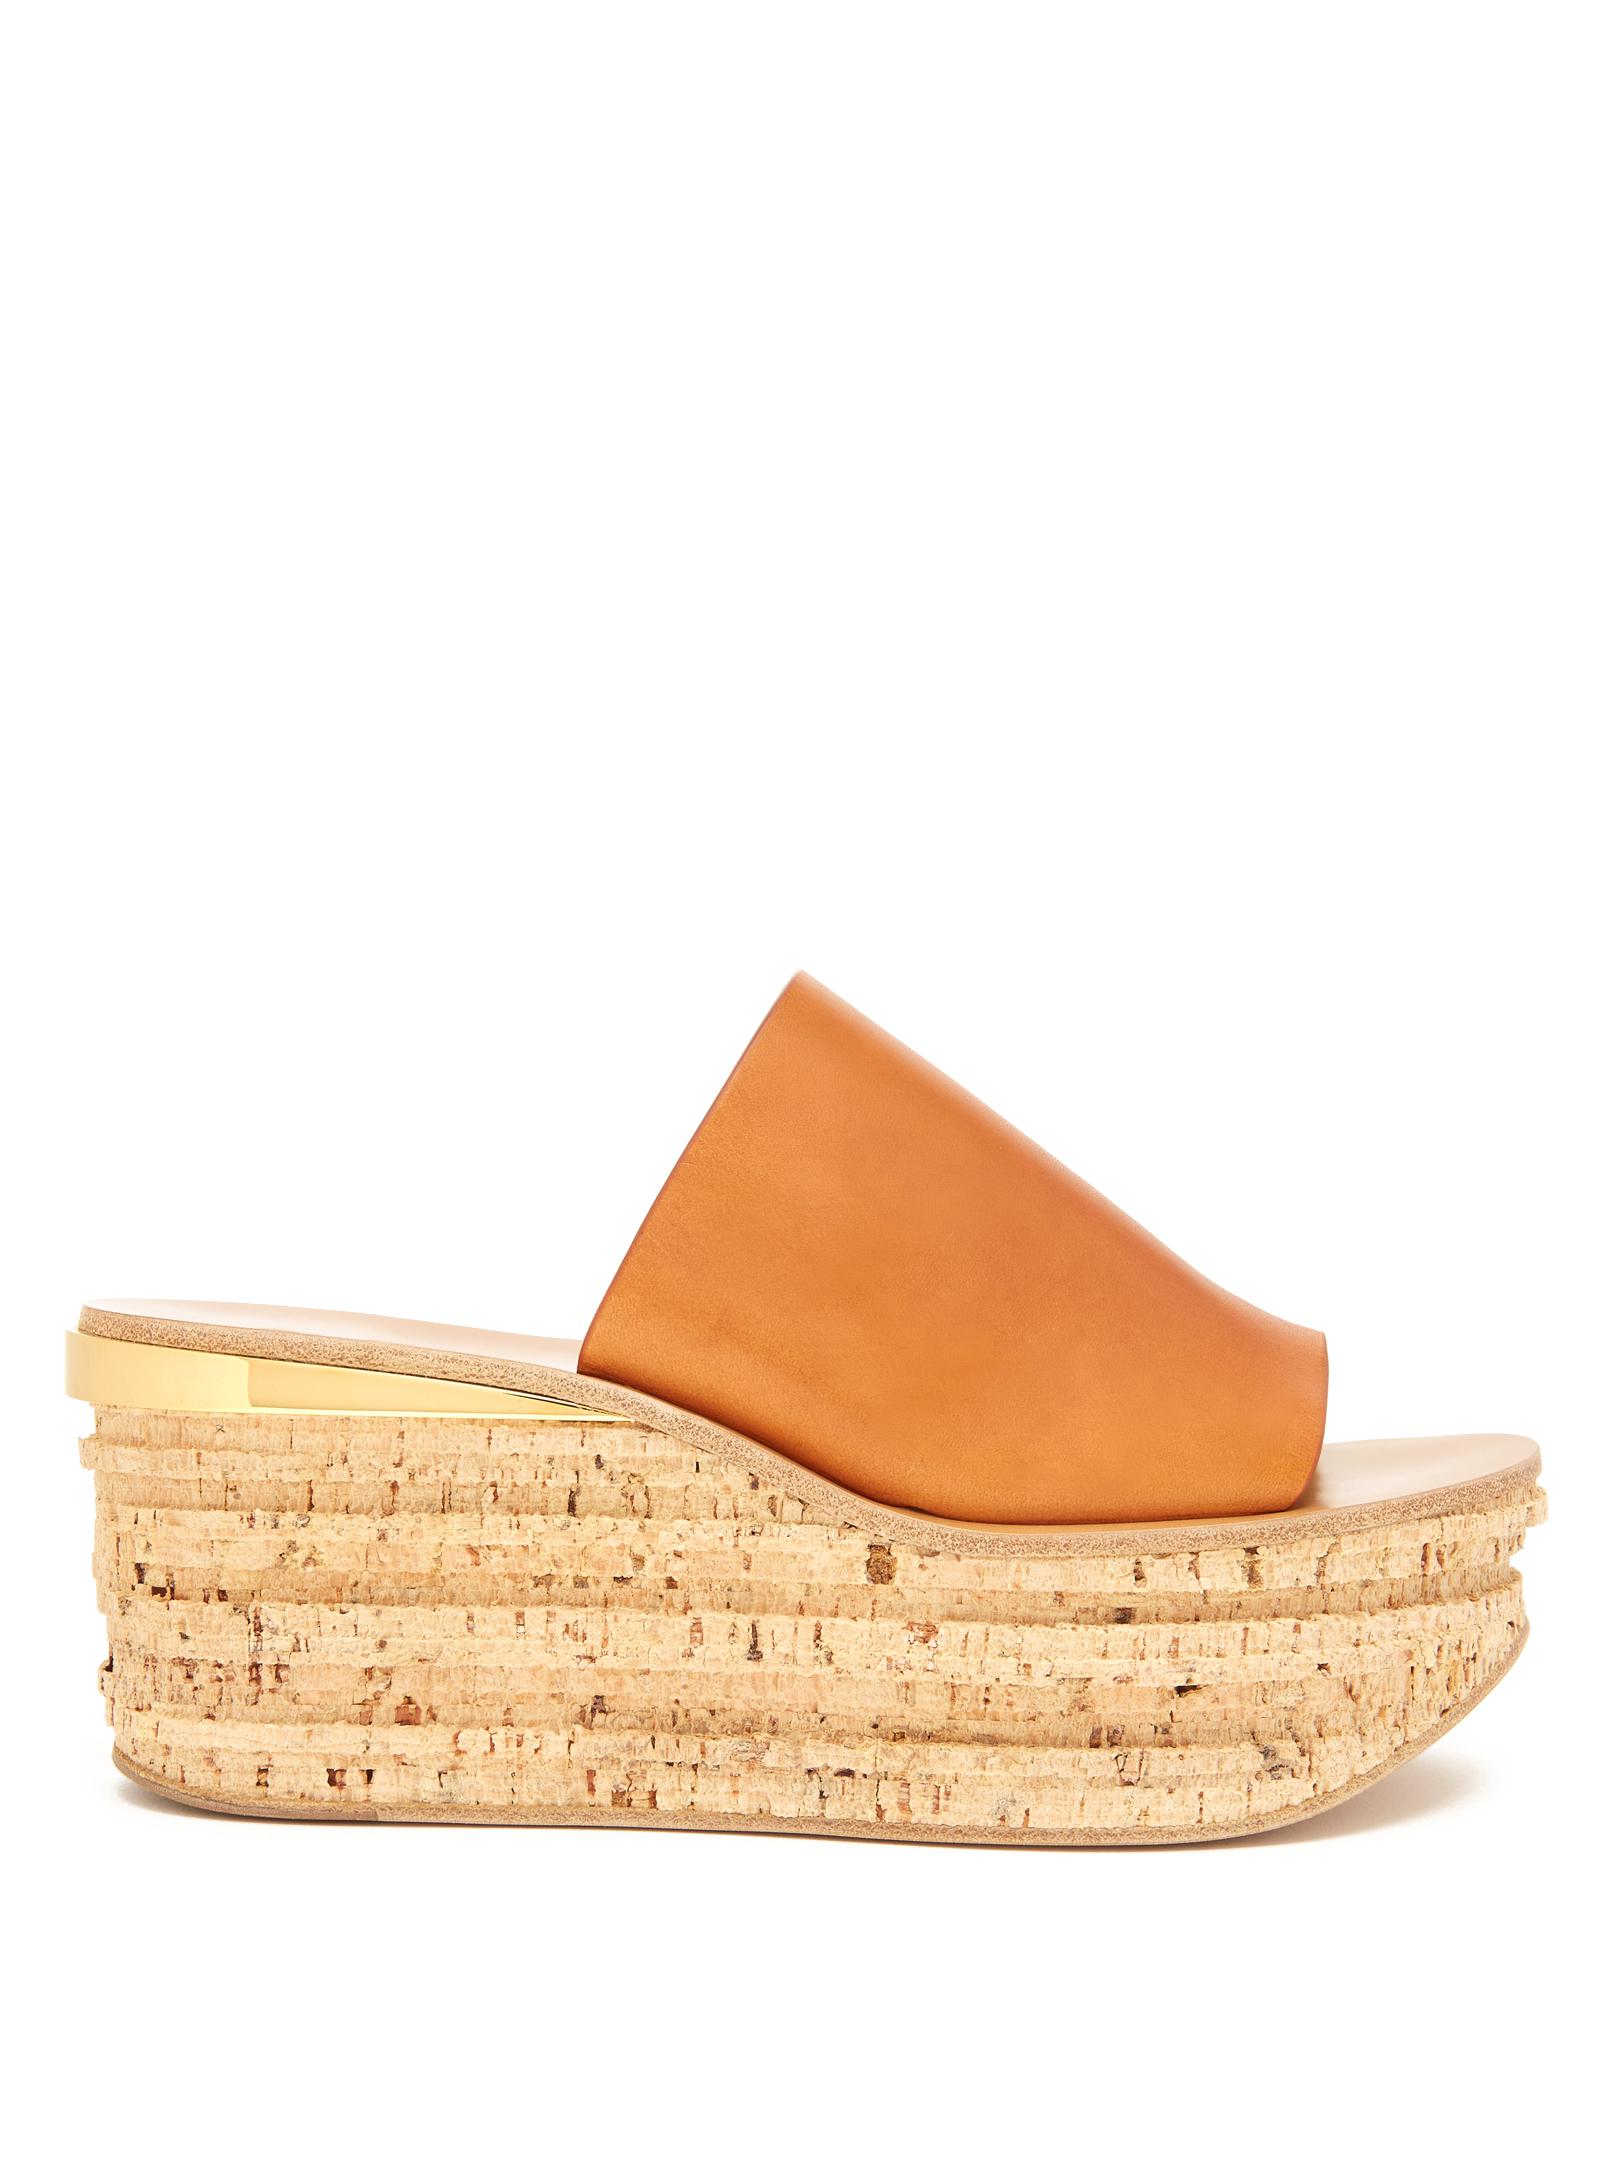 Chloé Camille Leather Wedge Mules in Brown | Lyst